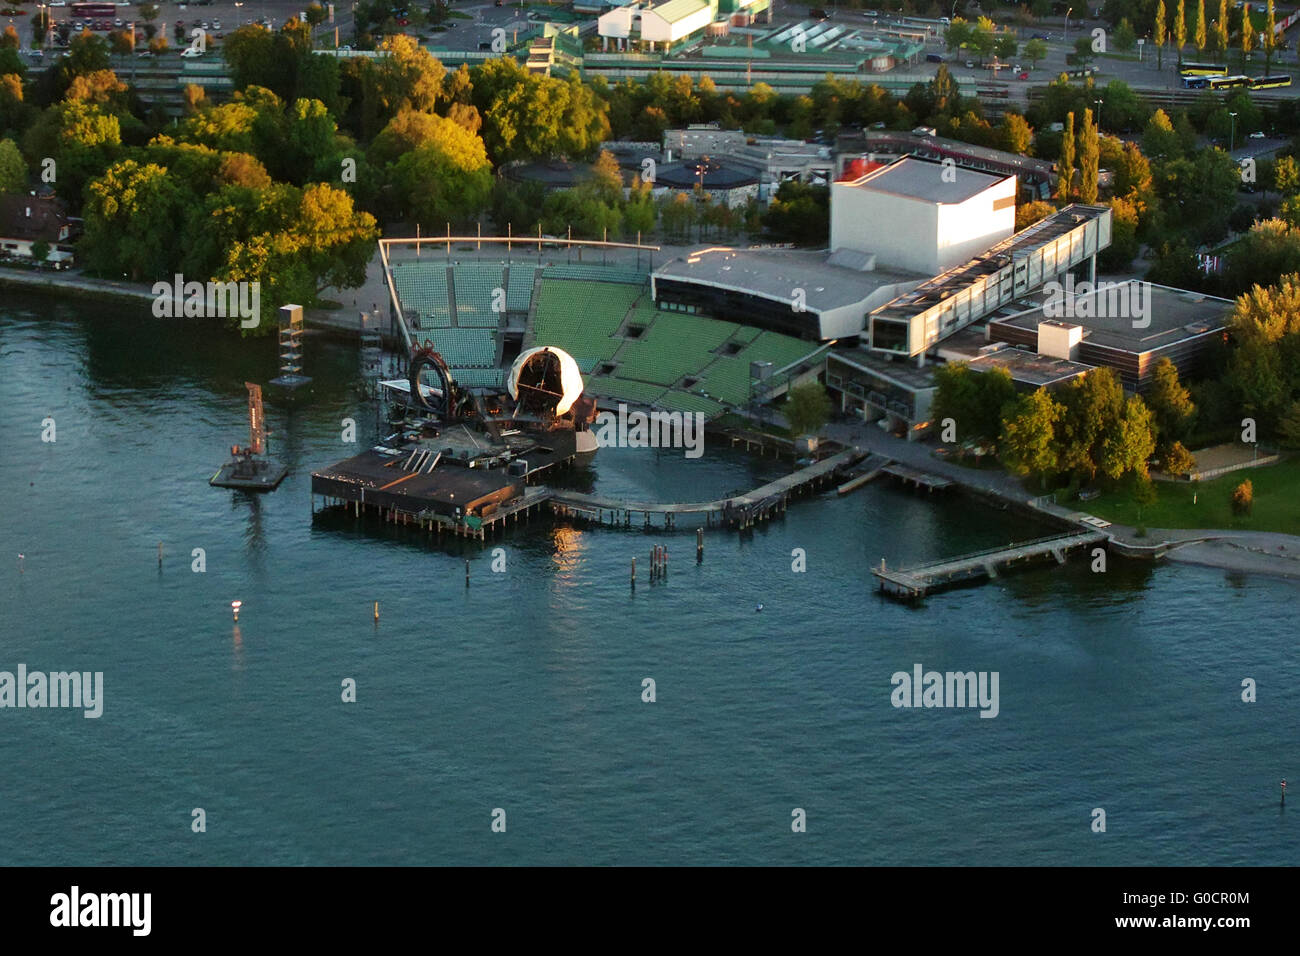 Aerial photography - Bregenz Floating Stage - Lak Stock Photo